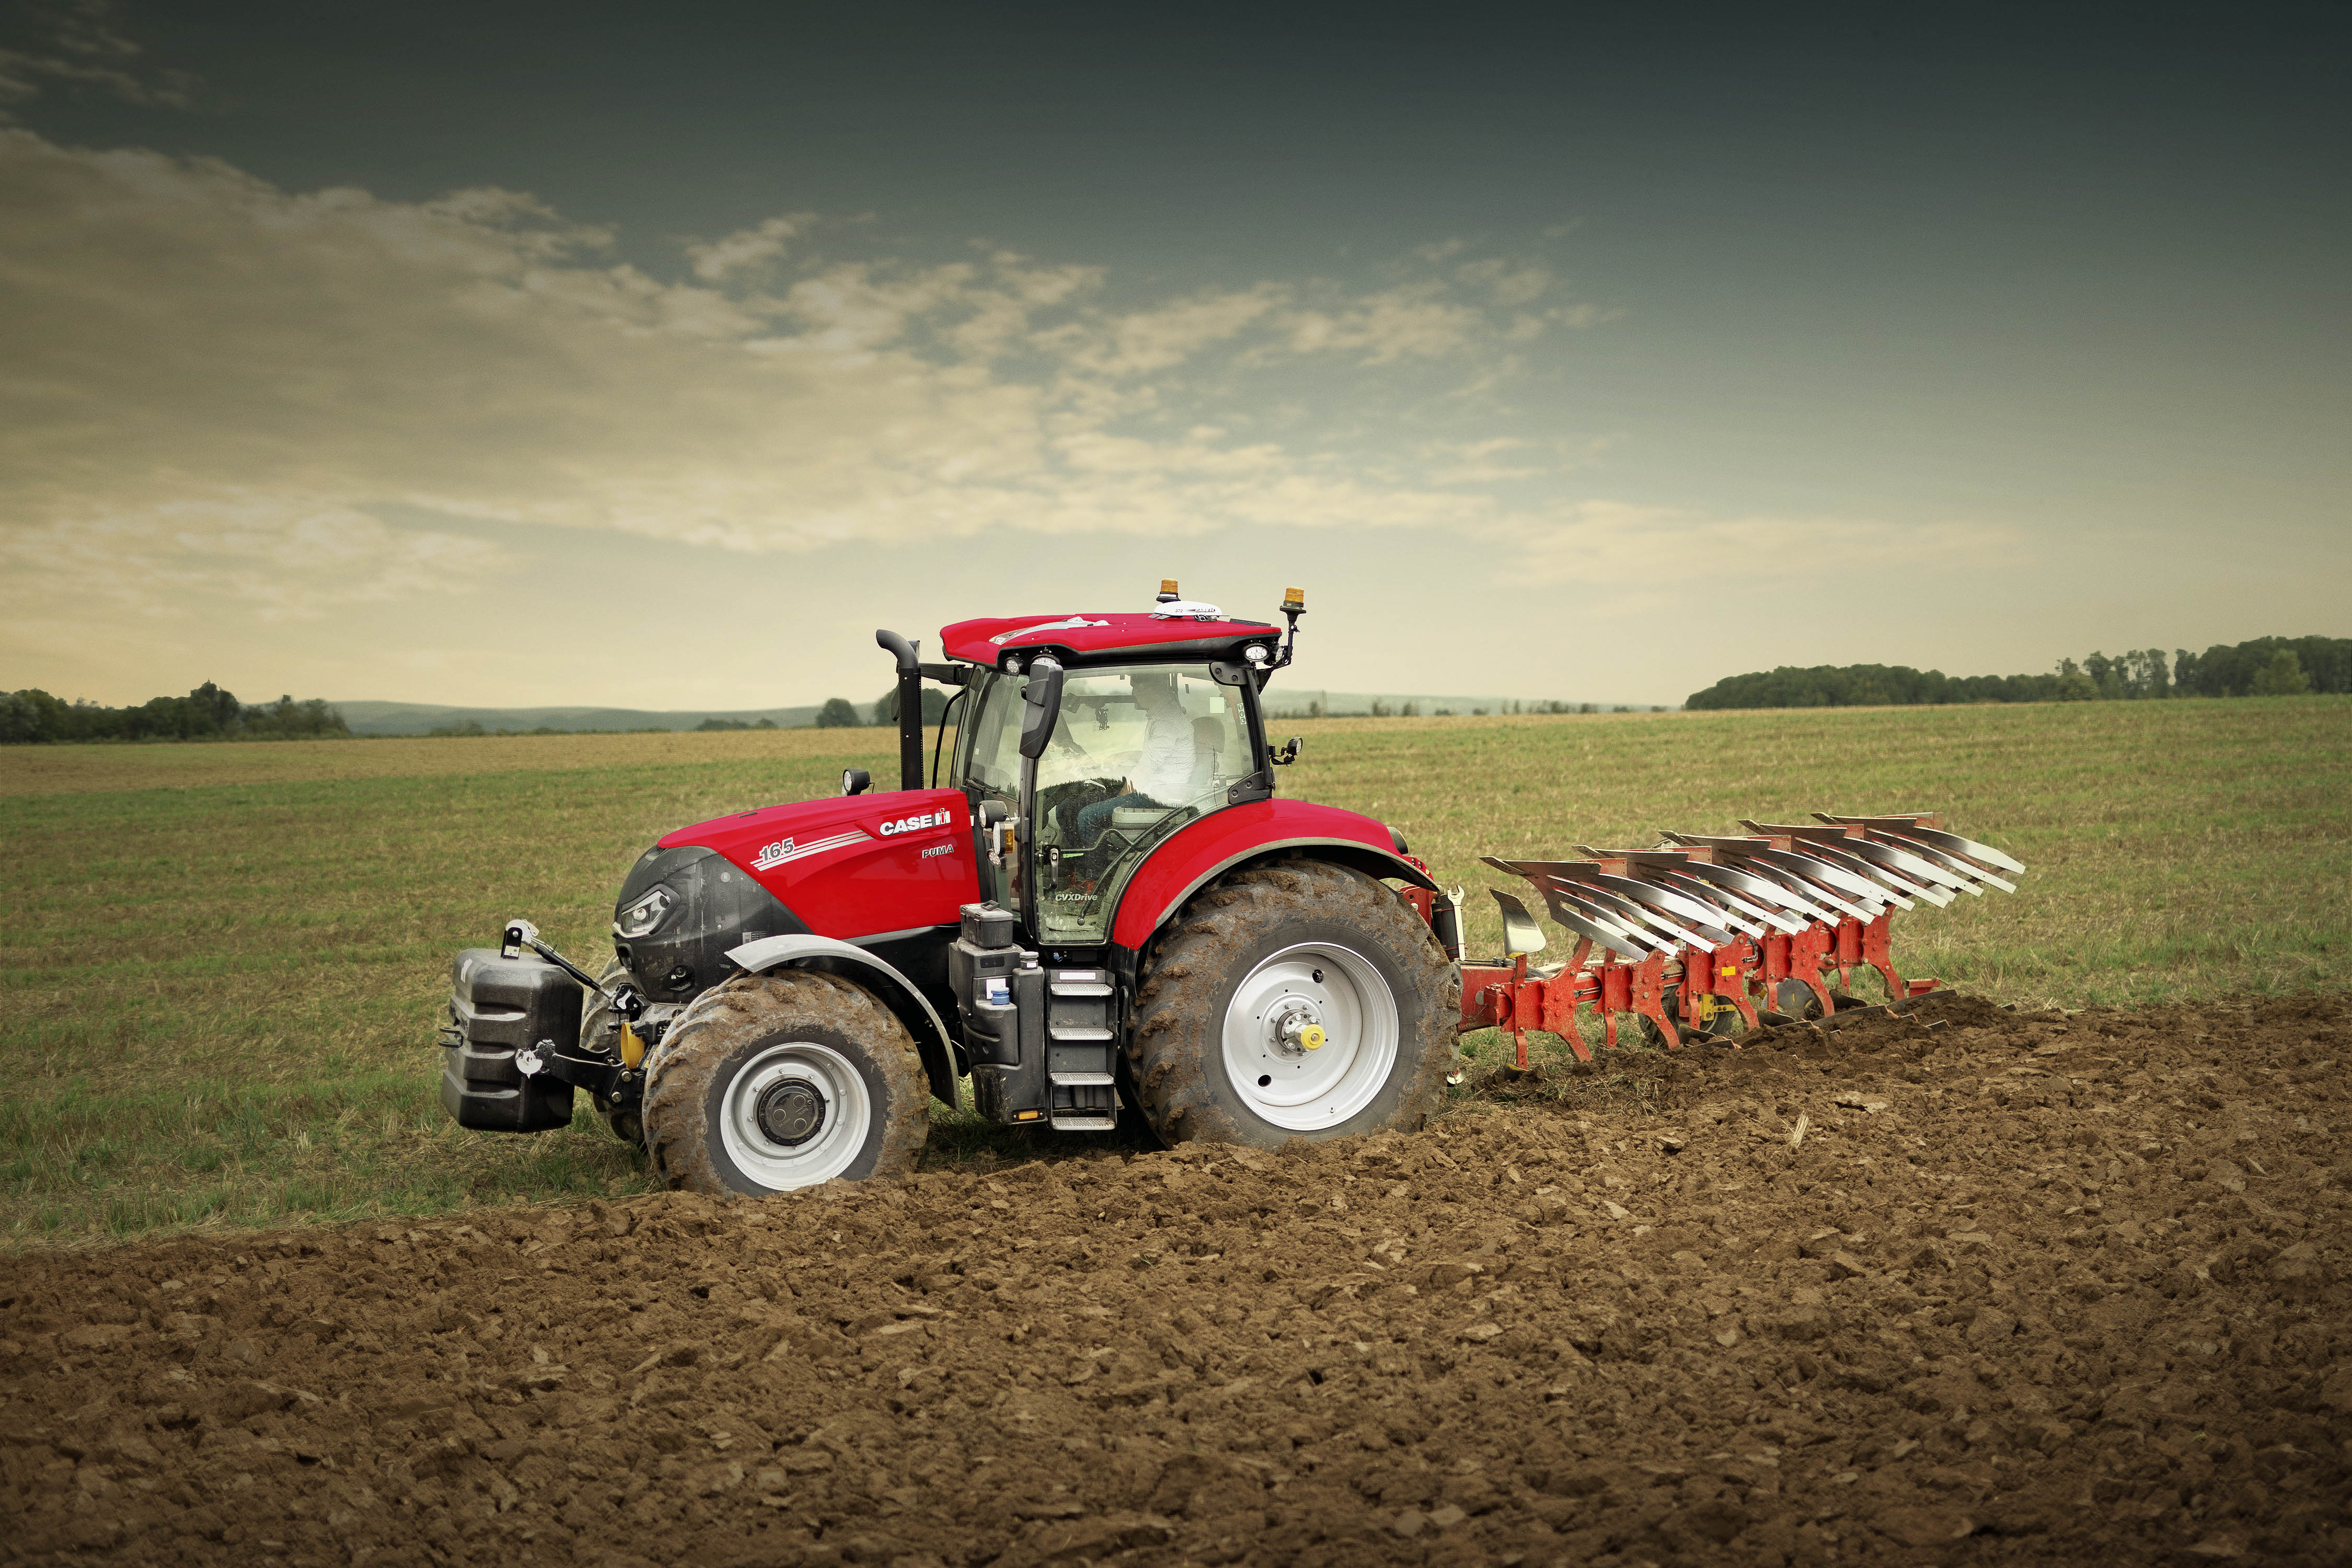 bus Speels spijsvertering Case IH Puma 140-175 tractors refined and refreshed for 2022 | LECTURA Press